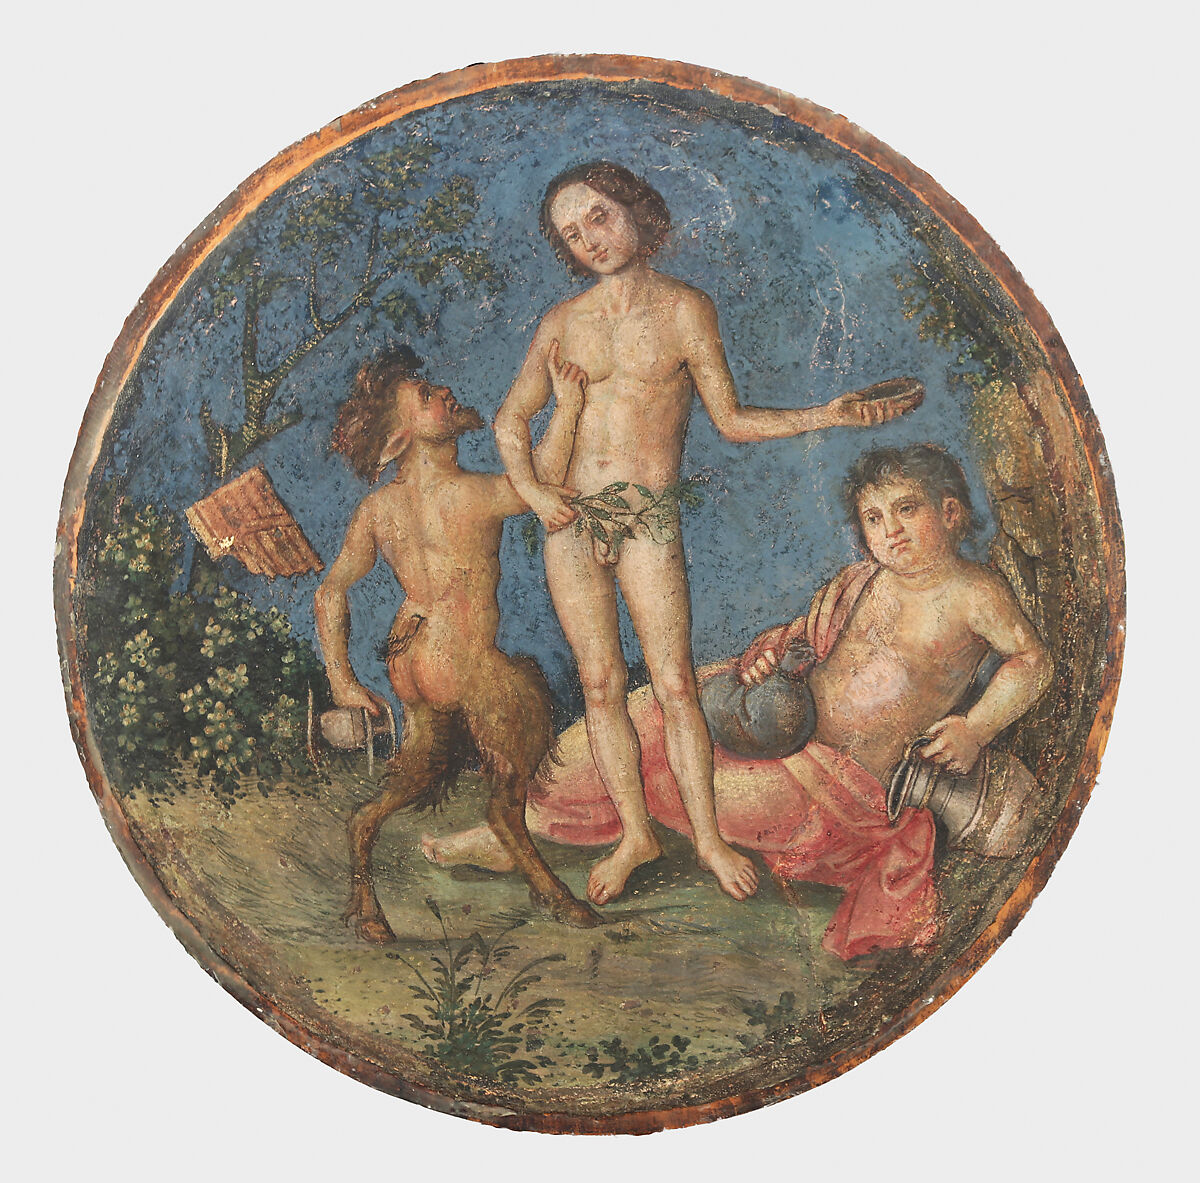 Bacchus, Pan and Silenus, Pinturicchio (Italian, Perugia 1454–1513 Siena), Fresco, transferred to canvas and attached to wood panels, Italian, Umbria 